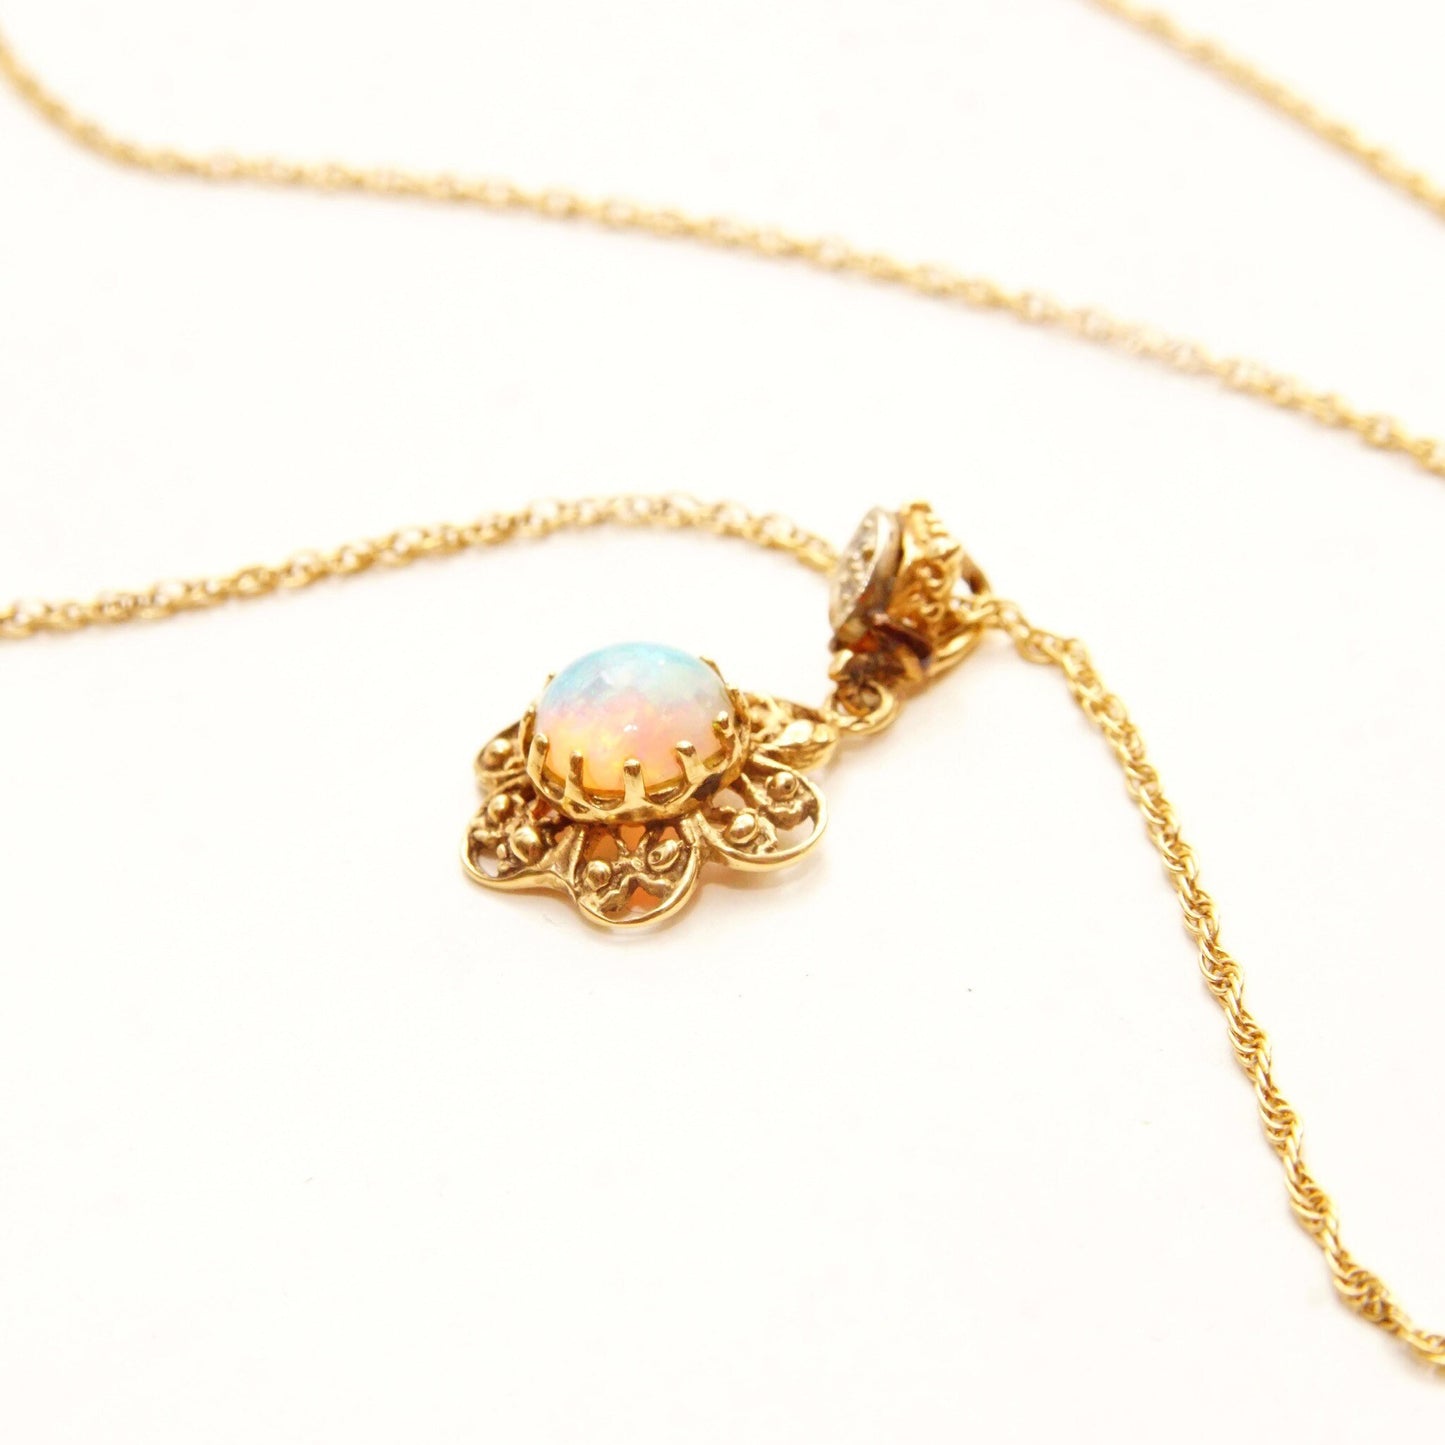 14K gold filigree opal flower pendant necklace with diamond accent on delicate rope chain against white background